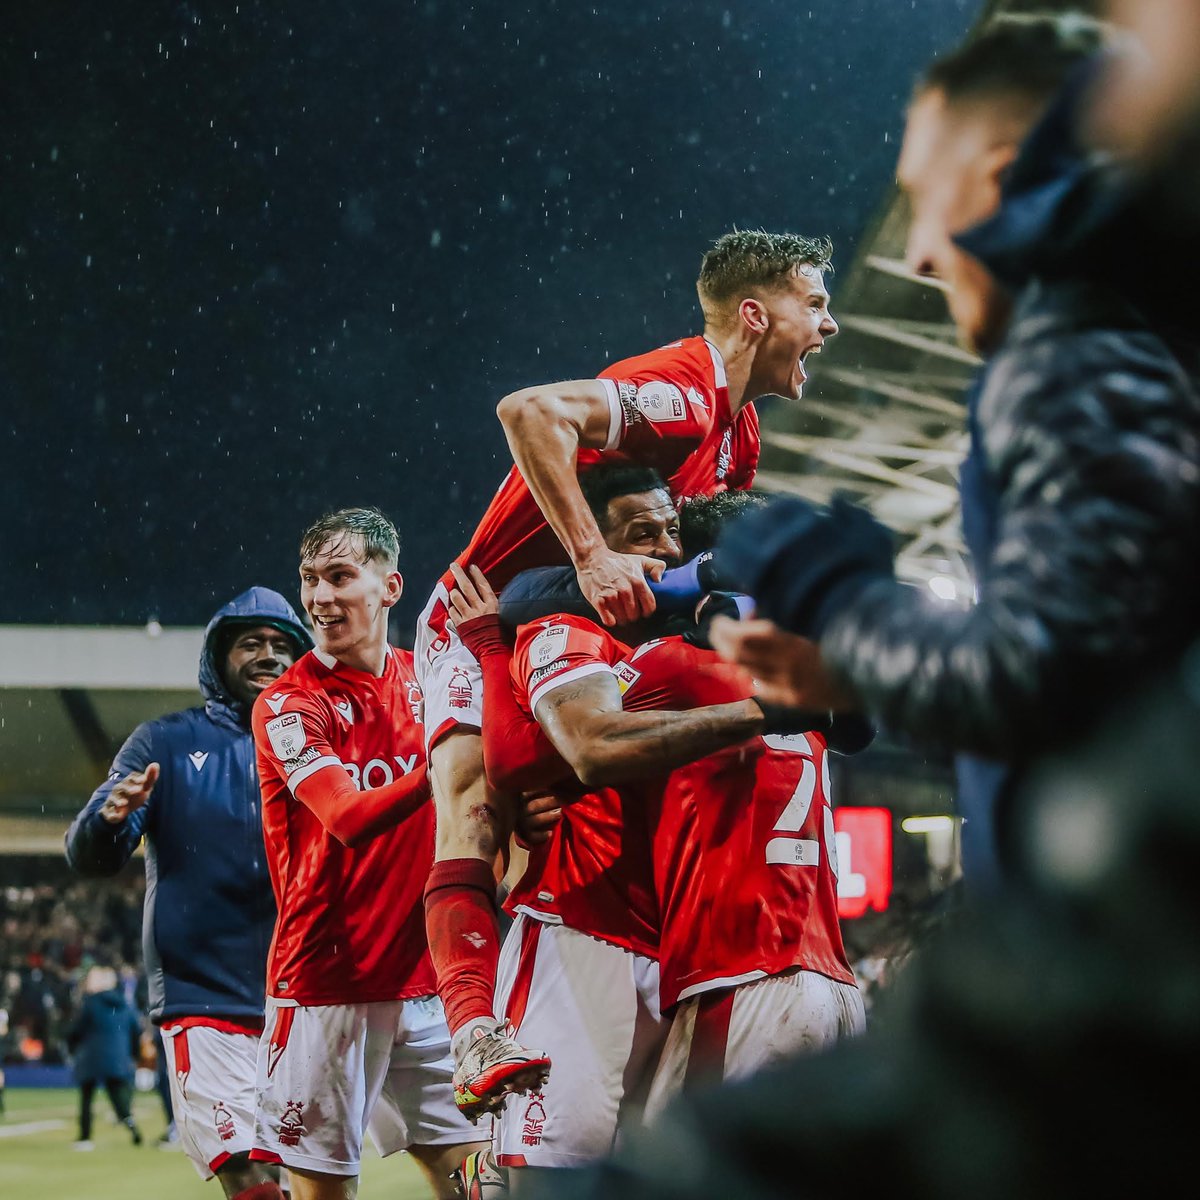 ❤️ #𝗧𝗢𝗚𝗘𝗧𝗛𝗘𝗥 🤩 Sum up this team in one word 👇 🌳🔴 #NFFC